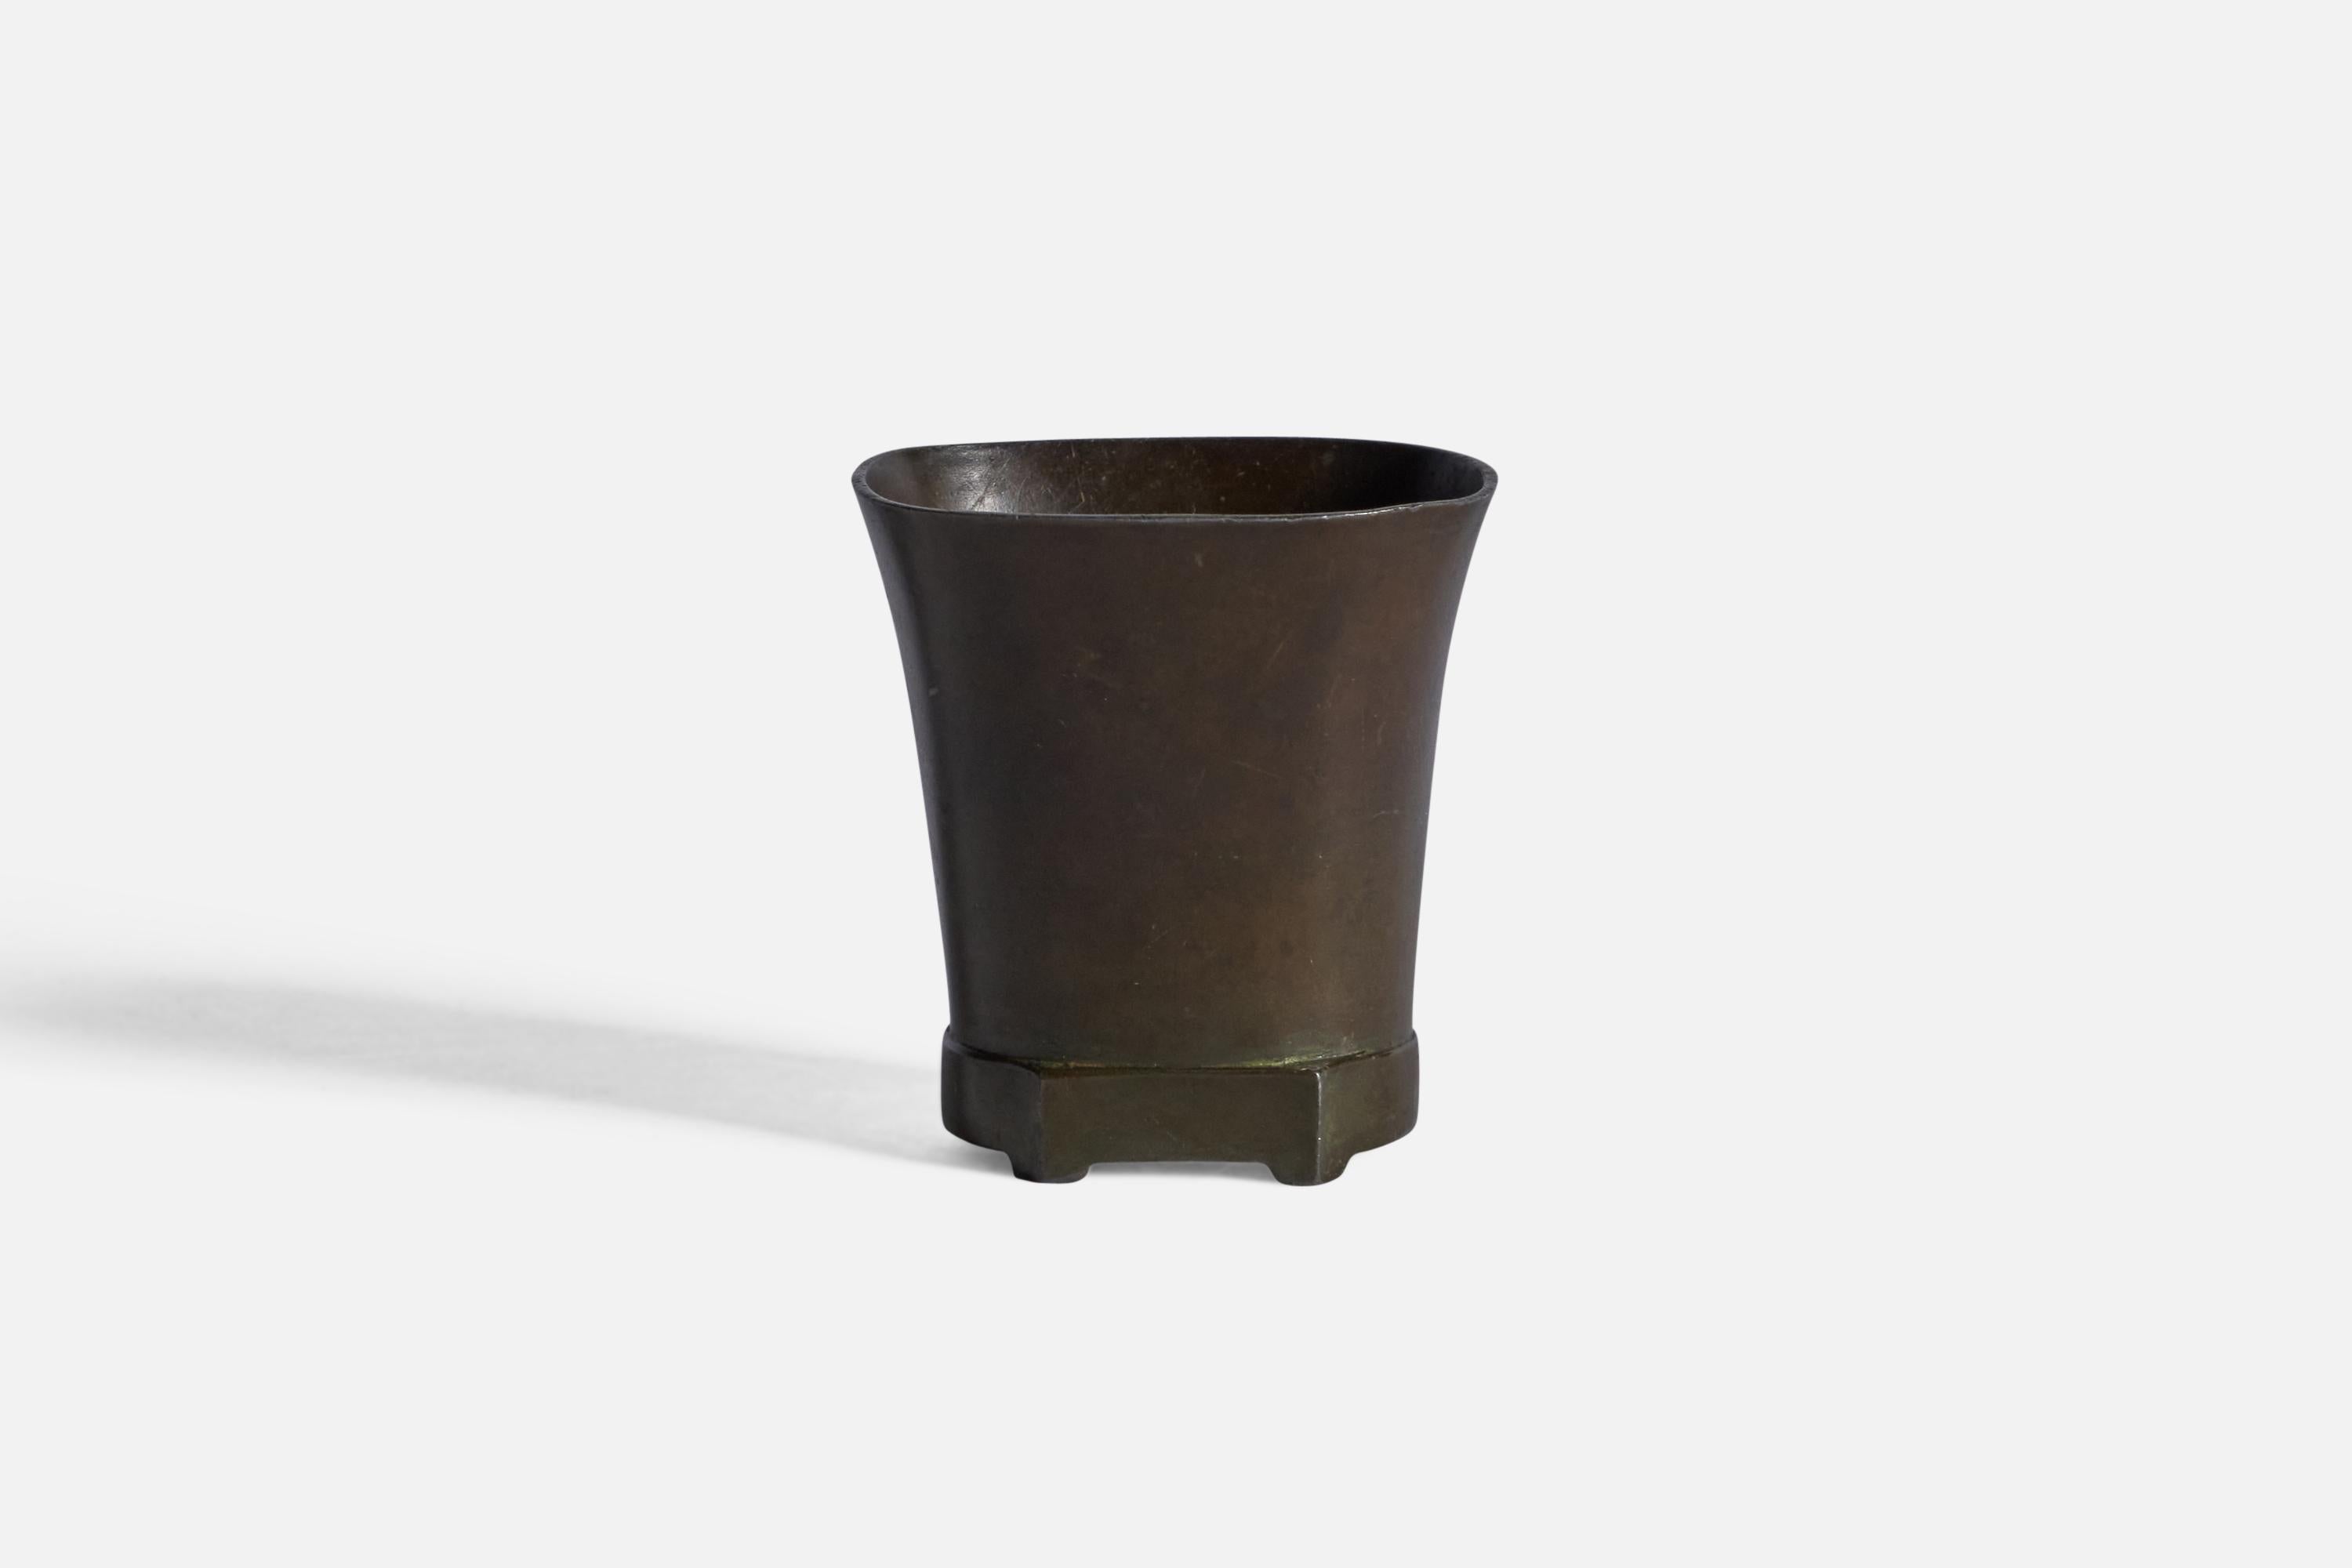 A small disko metal vase, designed and produced by Just Andersen, Denmark, c. 1930s.